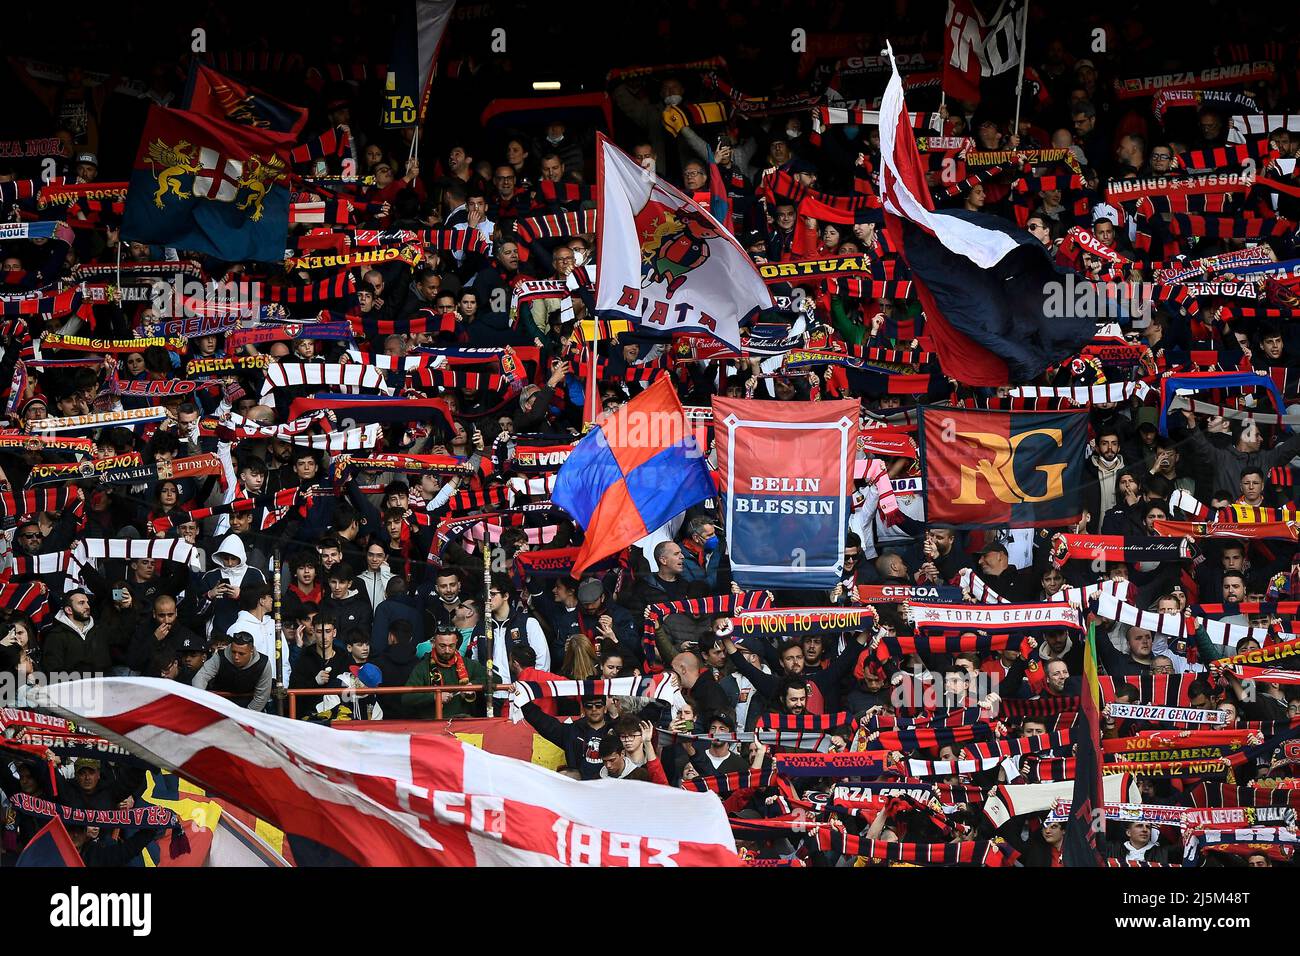 Genoa, Italy. 24 April 2022. during the Serie A football match